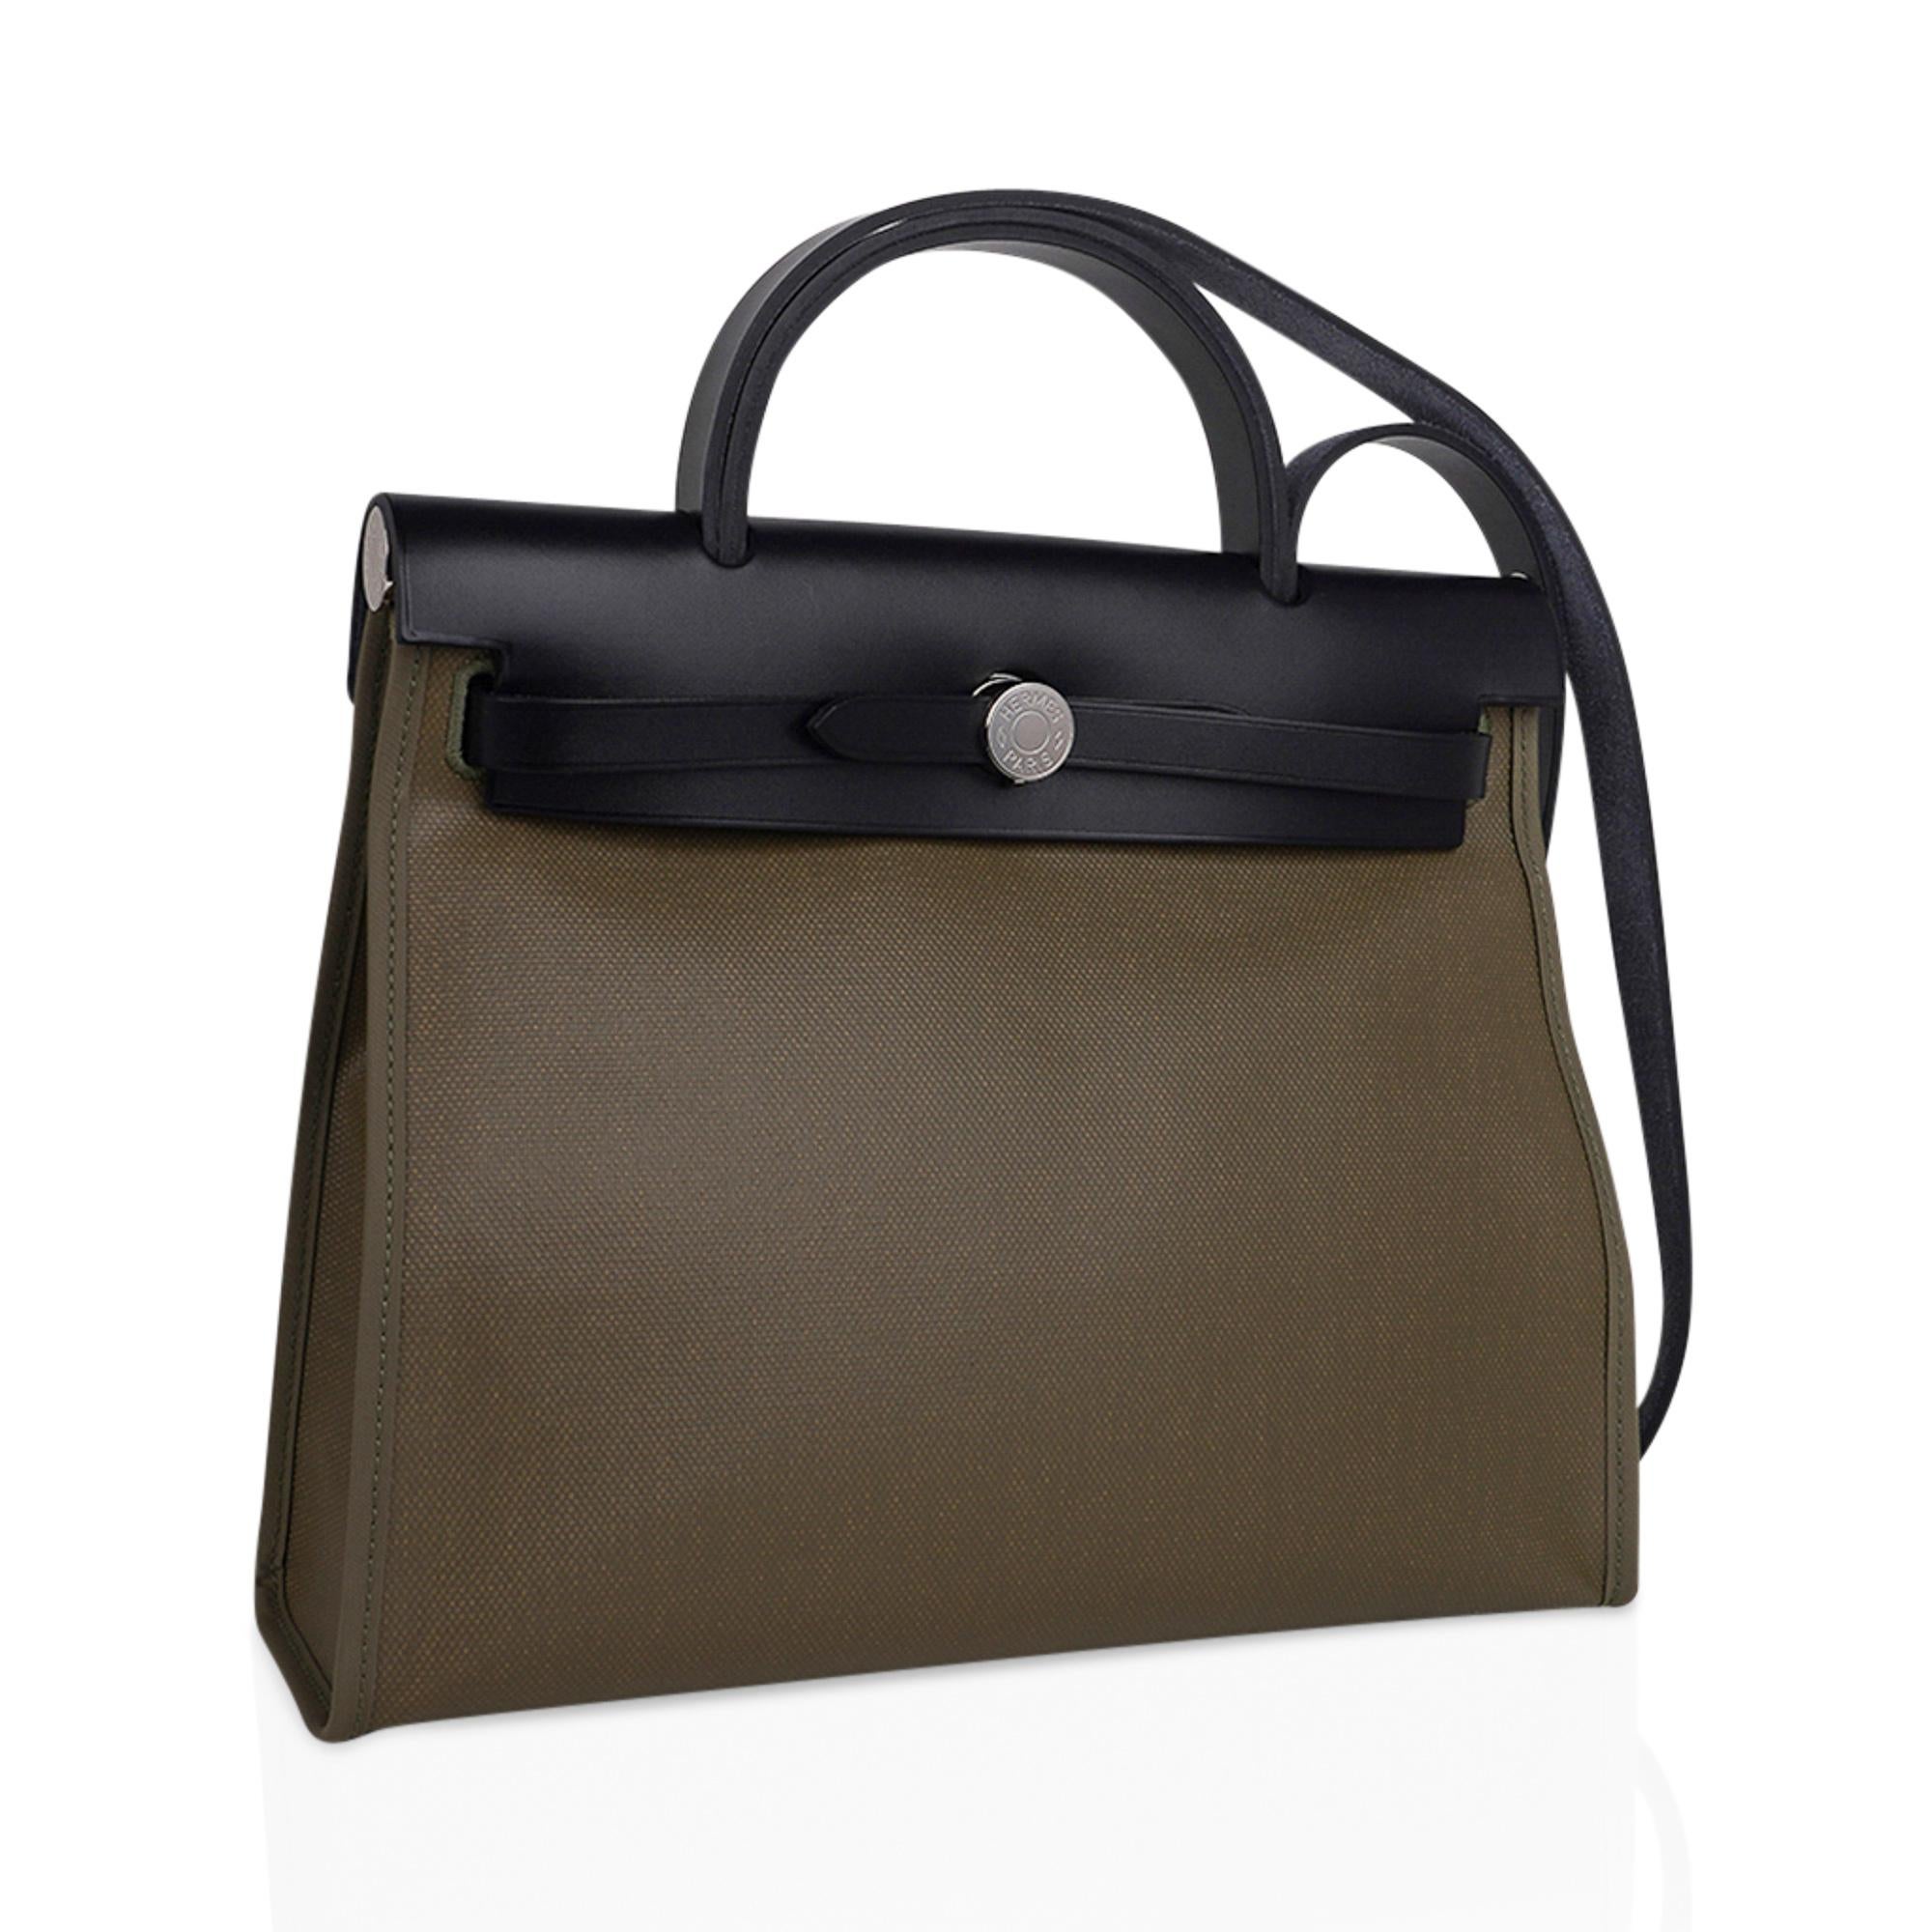 Mightychic offers an Hermes Herbag Zip 31 featured in Khaki Berline, a coated canvas and Black leather.
Signature Herbag Clou de Selle in Palladium hardware.
Bag has Toile removable pochette.
Comes with lock, keys and clochette, sleeper and